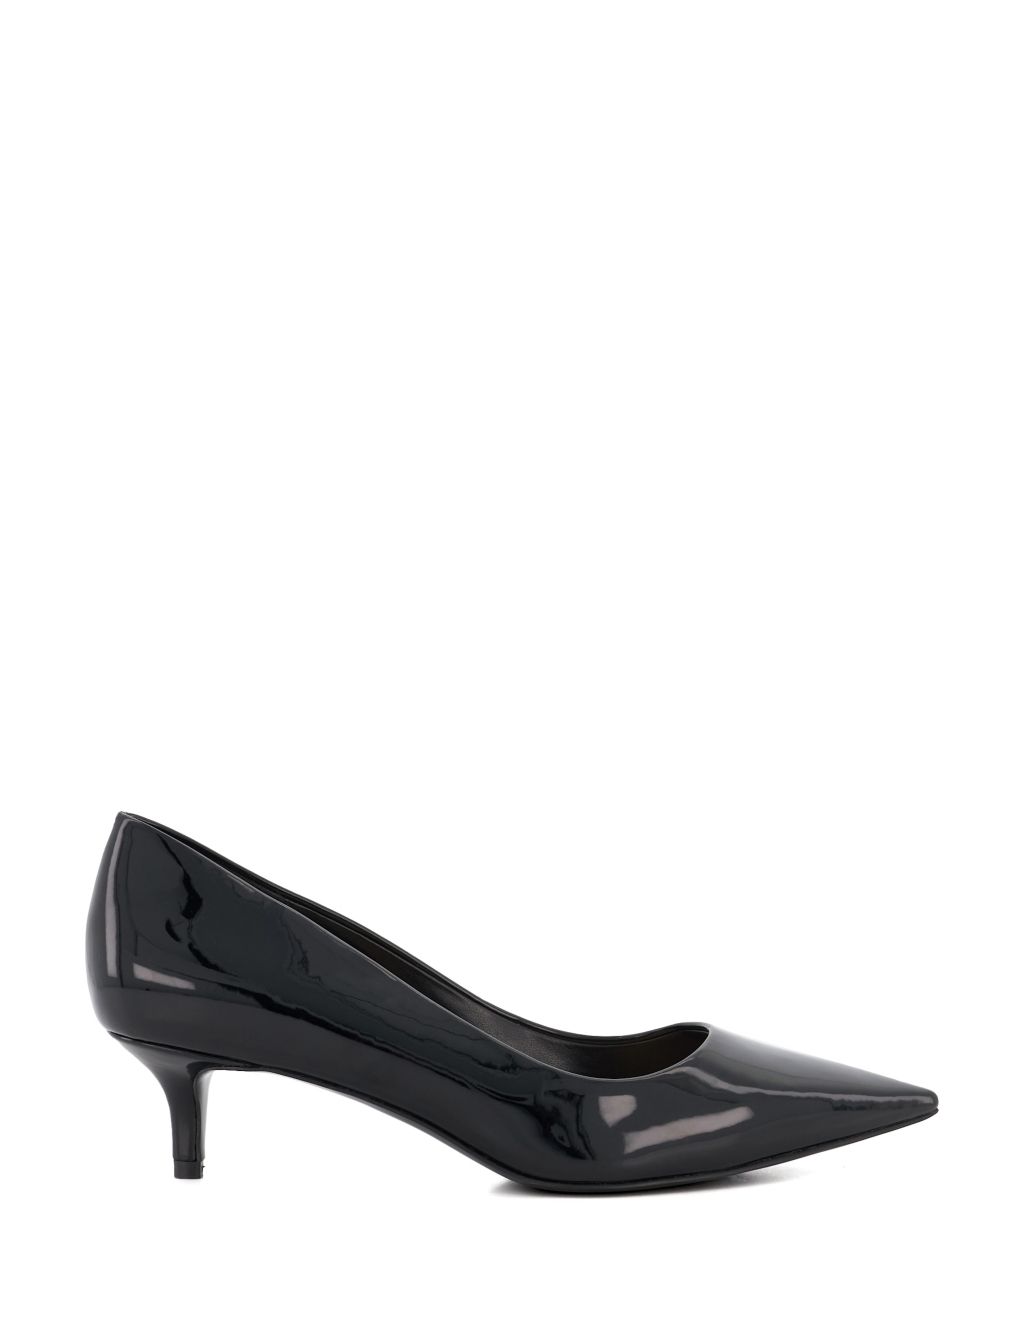 Patent Kitten Heel Pointed Court Shoes image 1